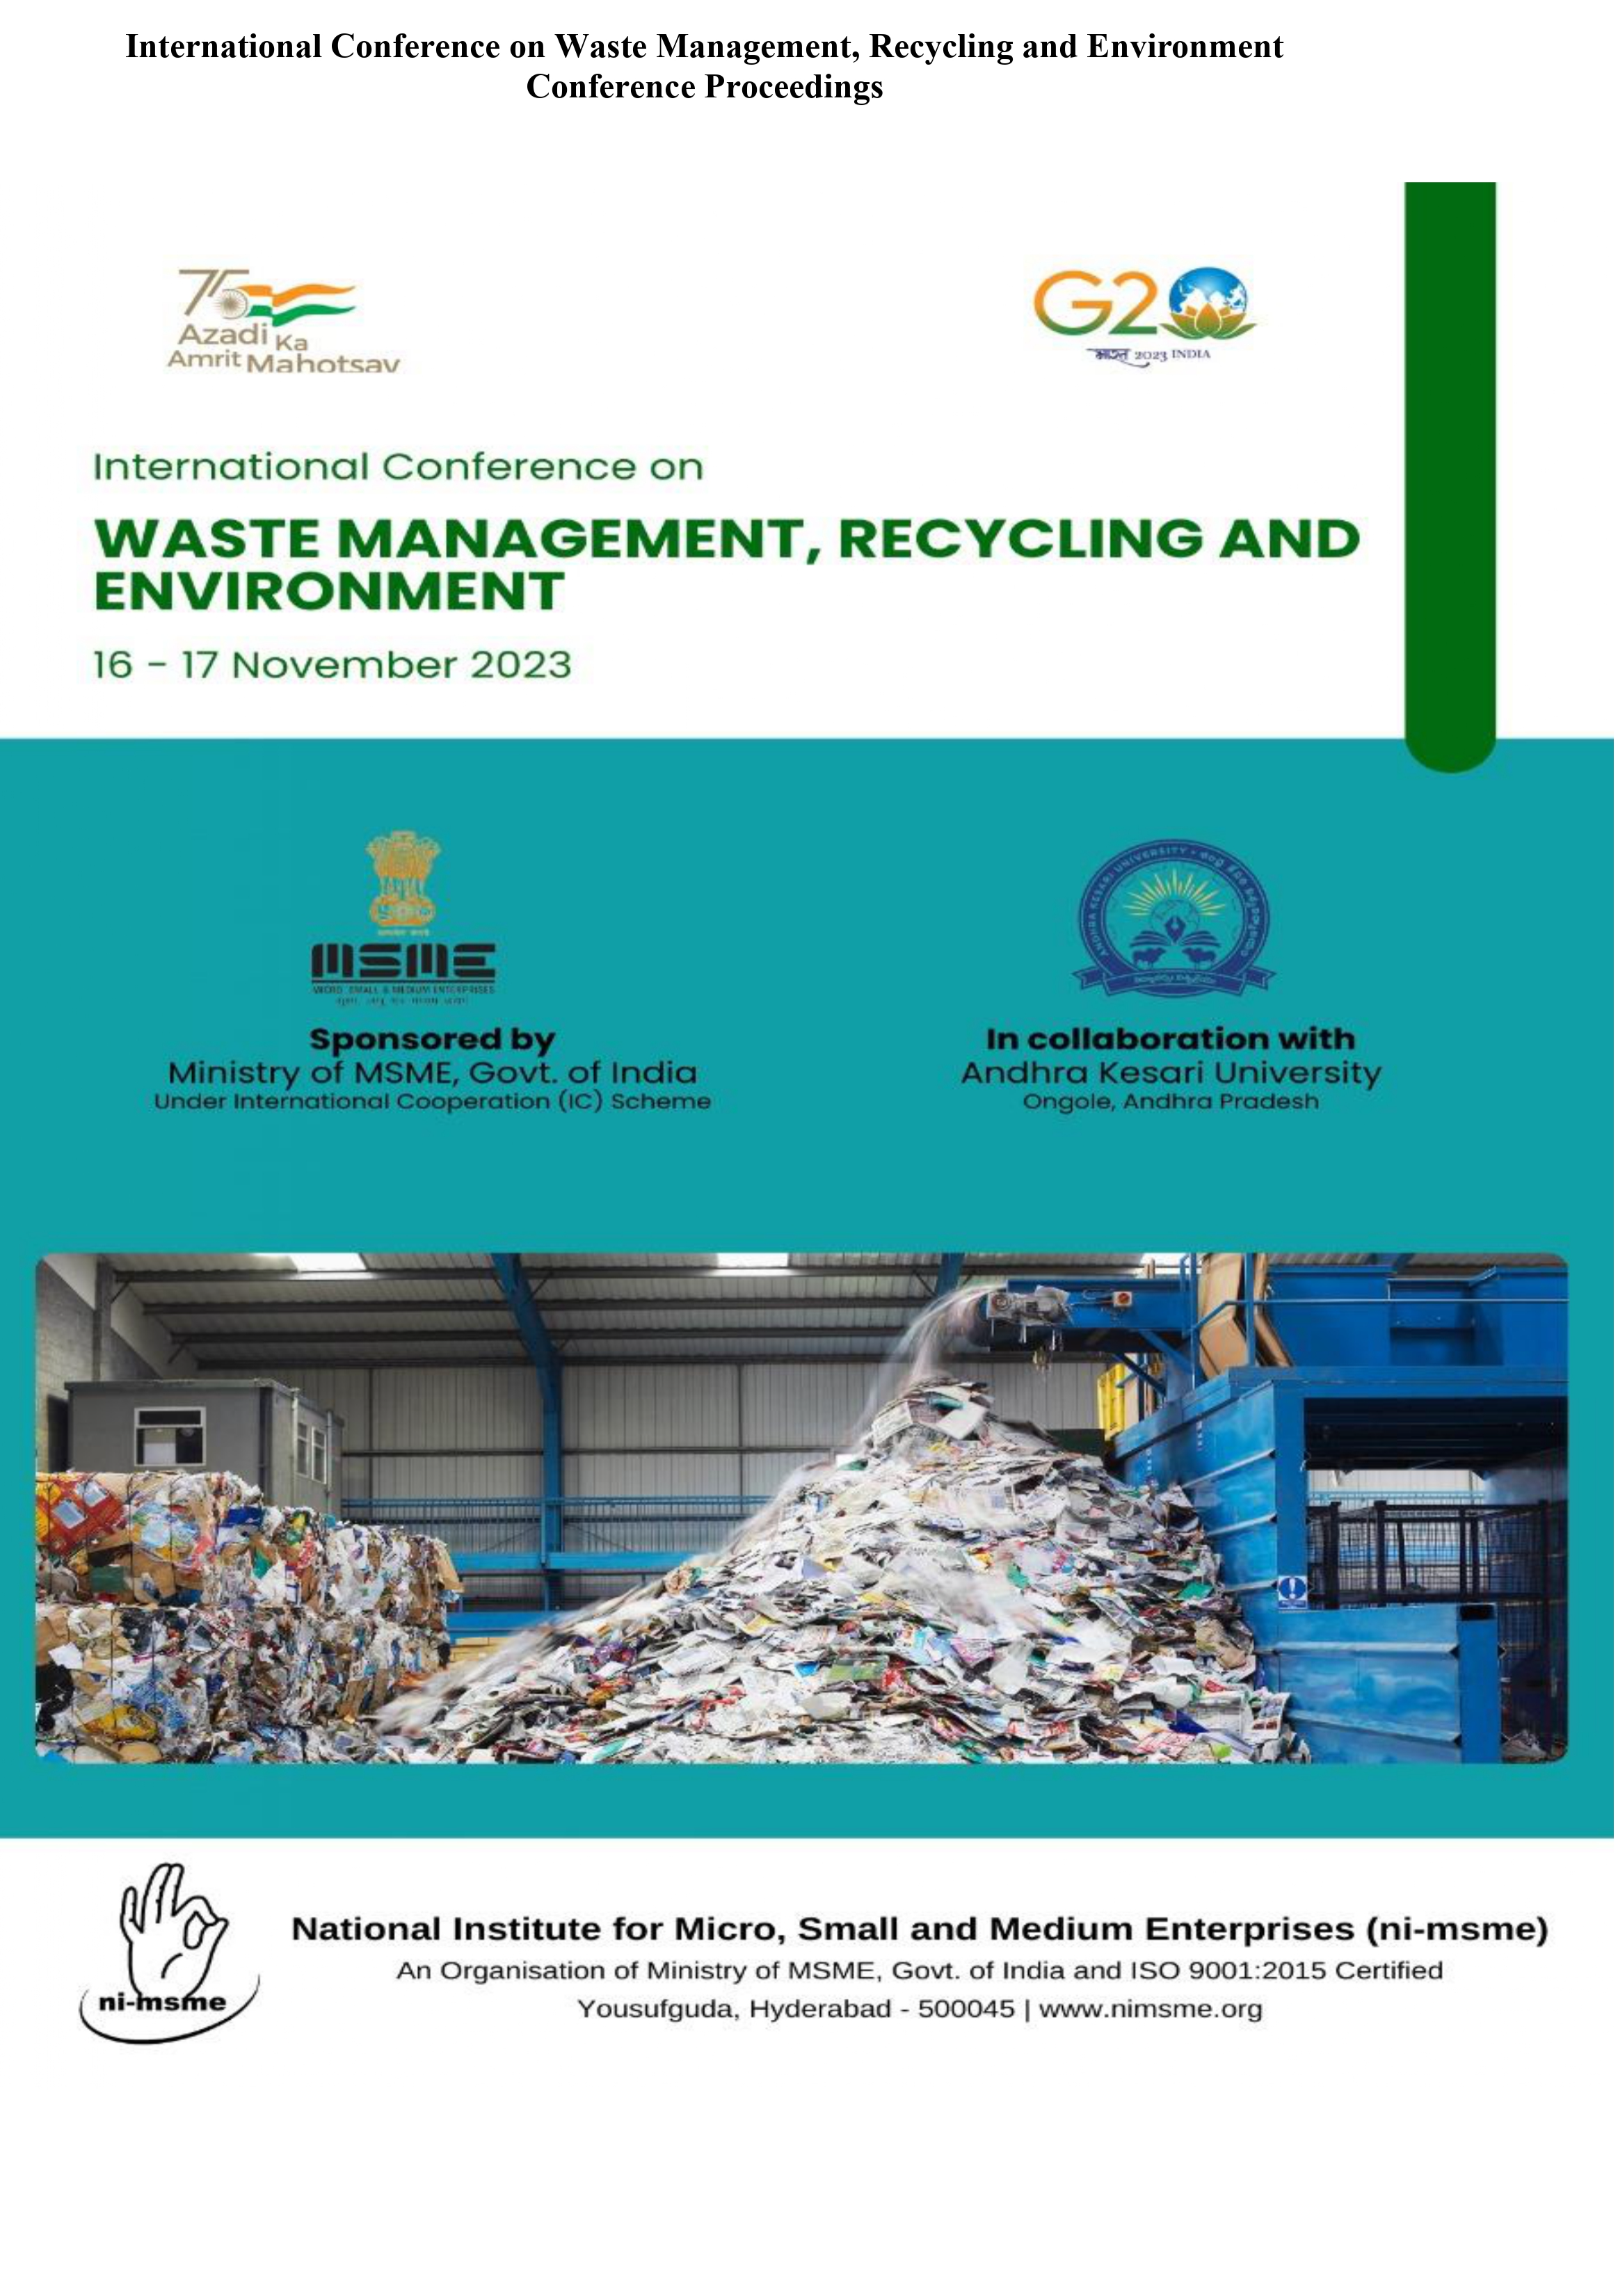 International Conference on Waste Management, Recycling and Environment